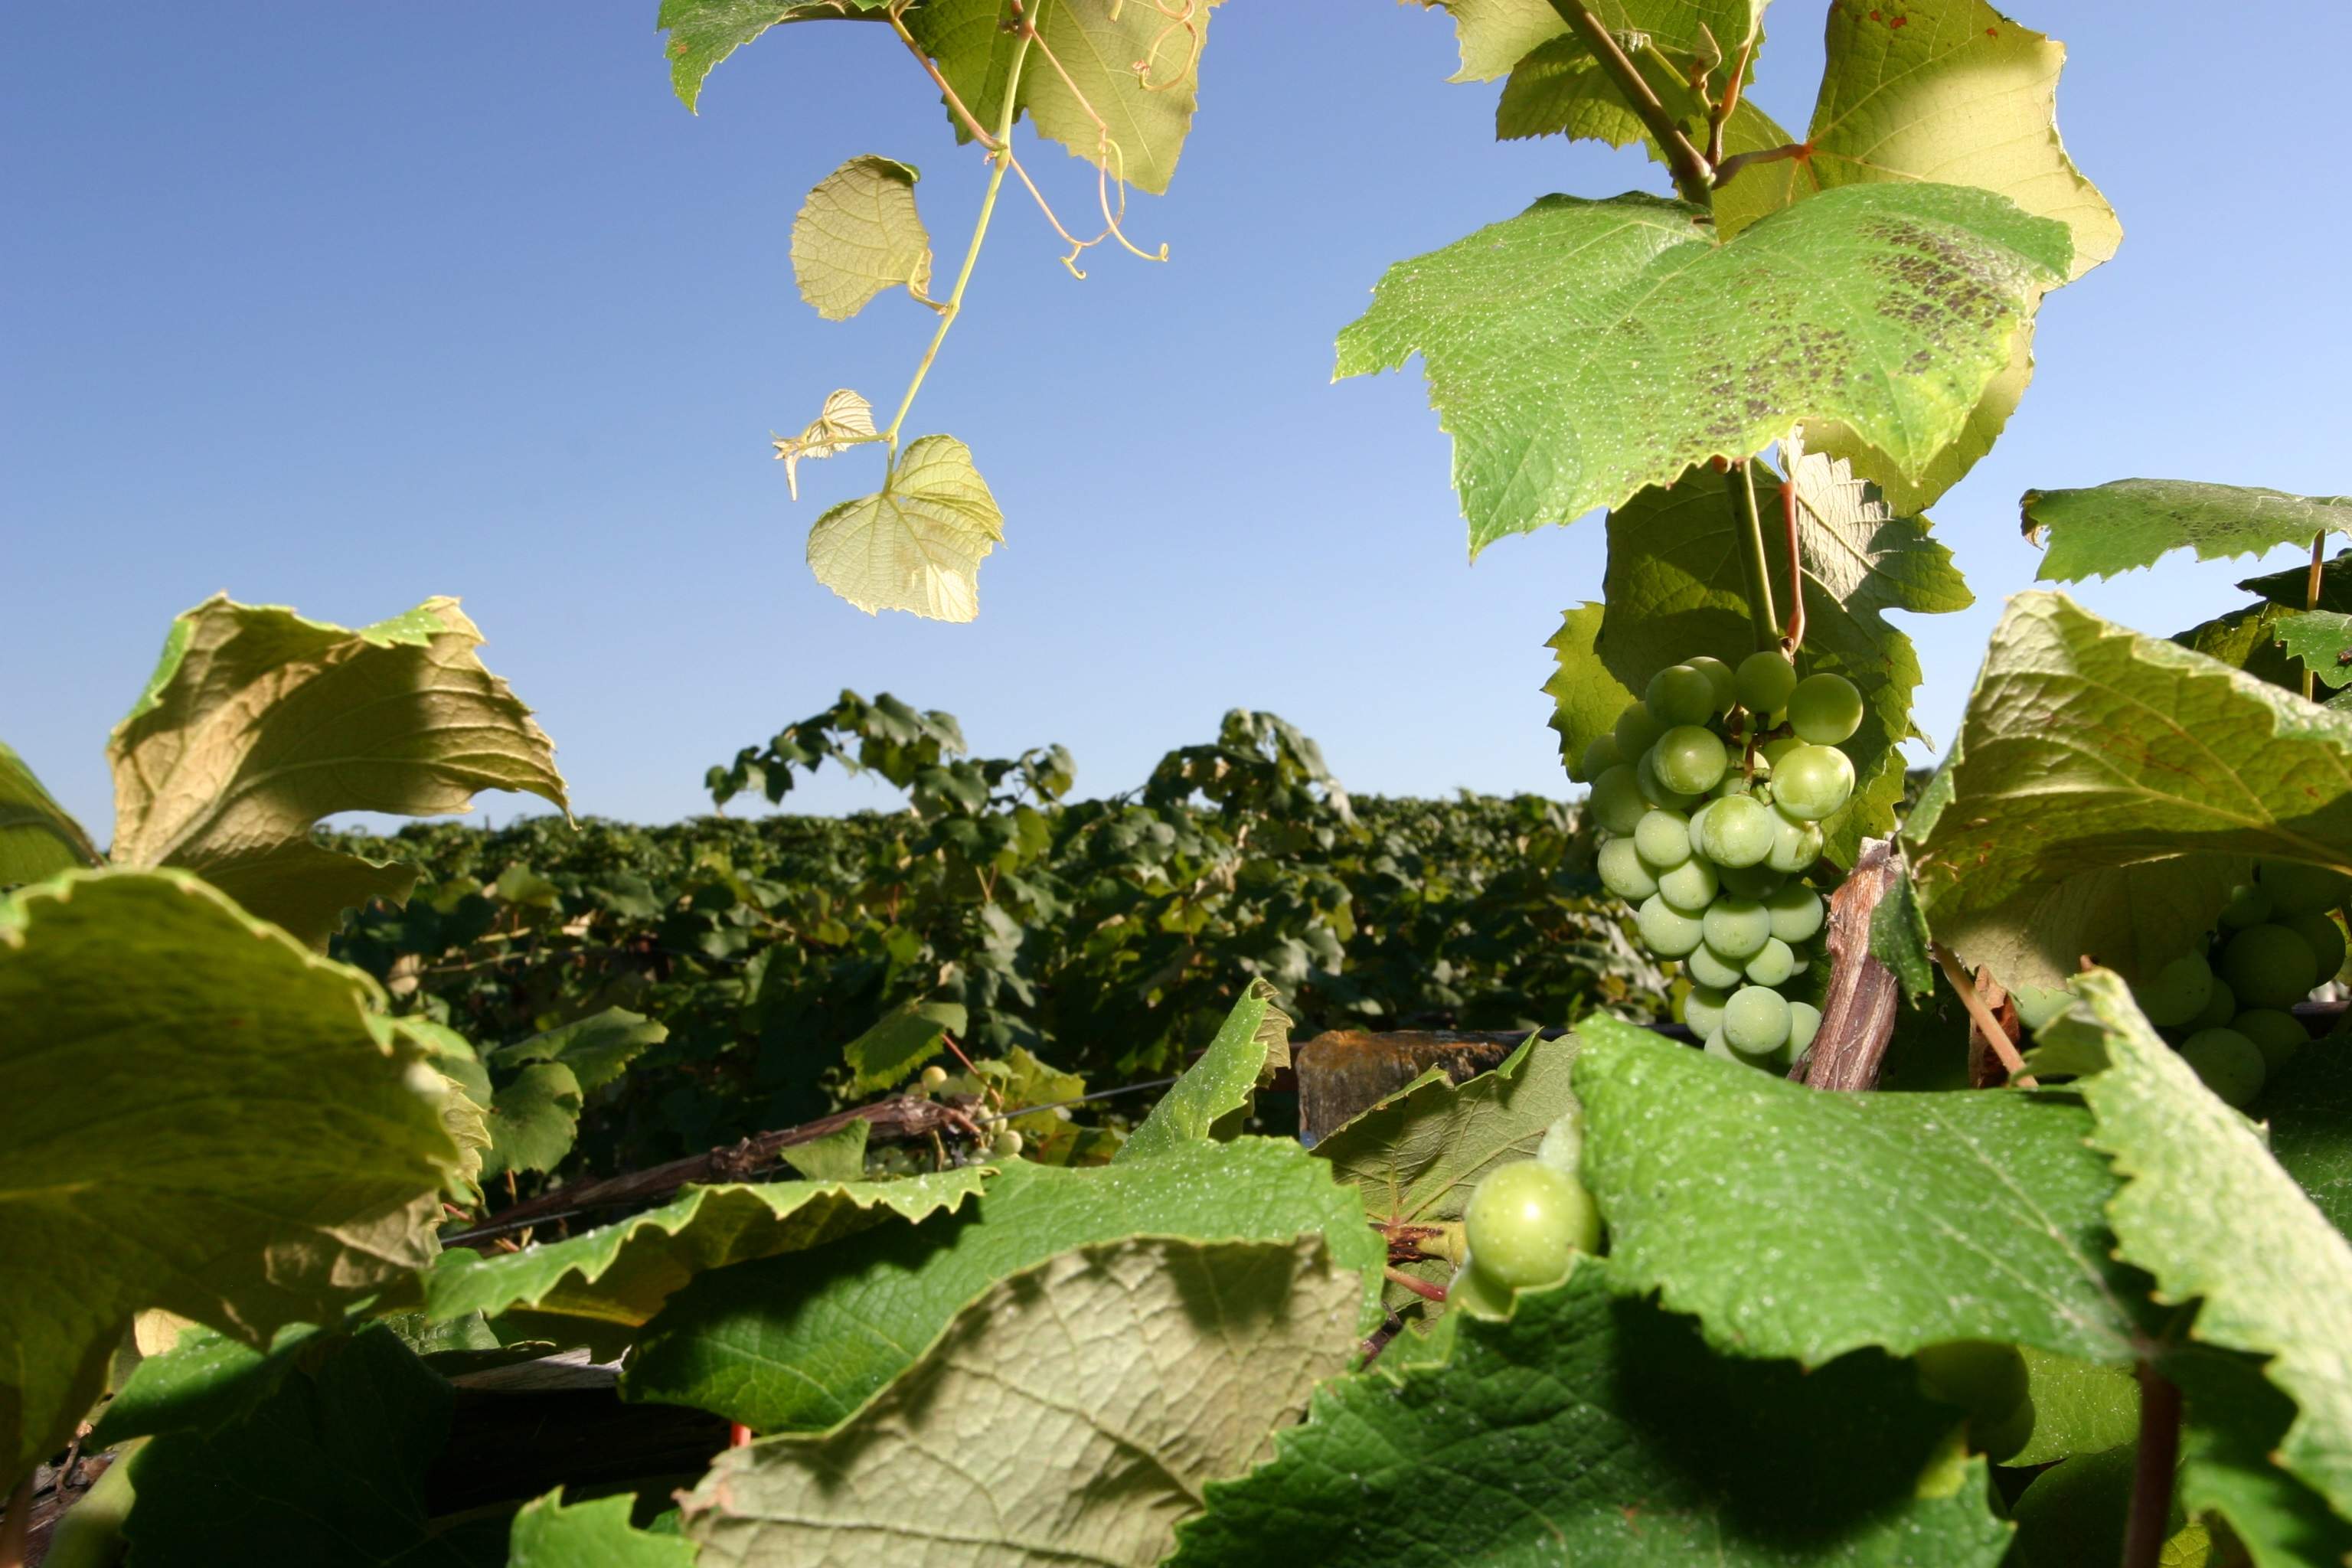 A close-up of grapes on the vine at a Nauvoo vineyard